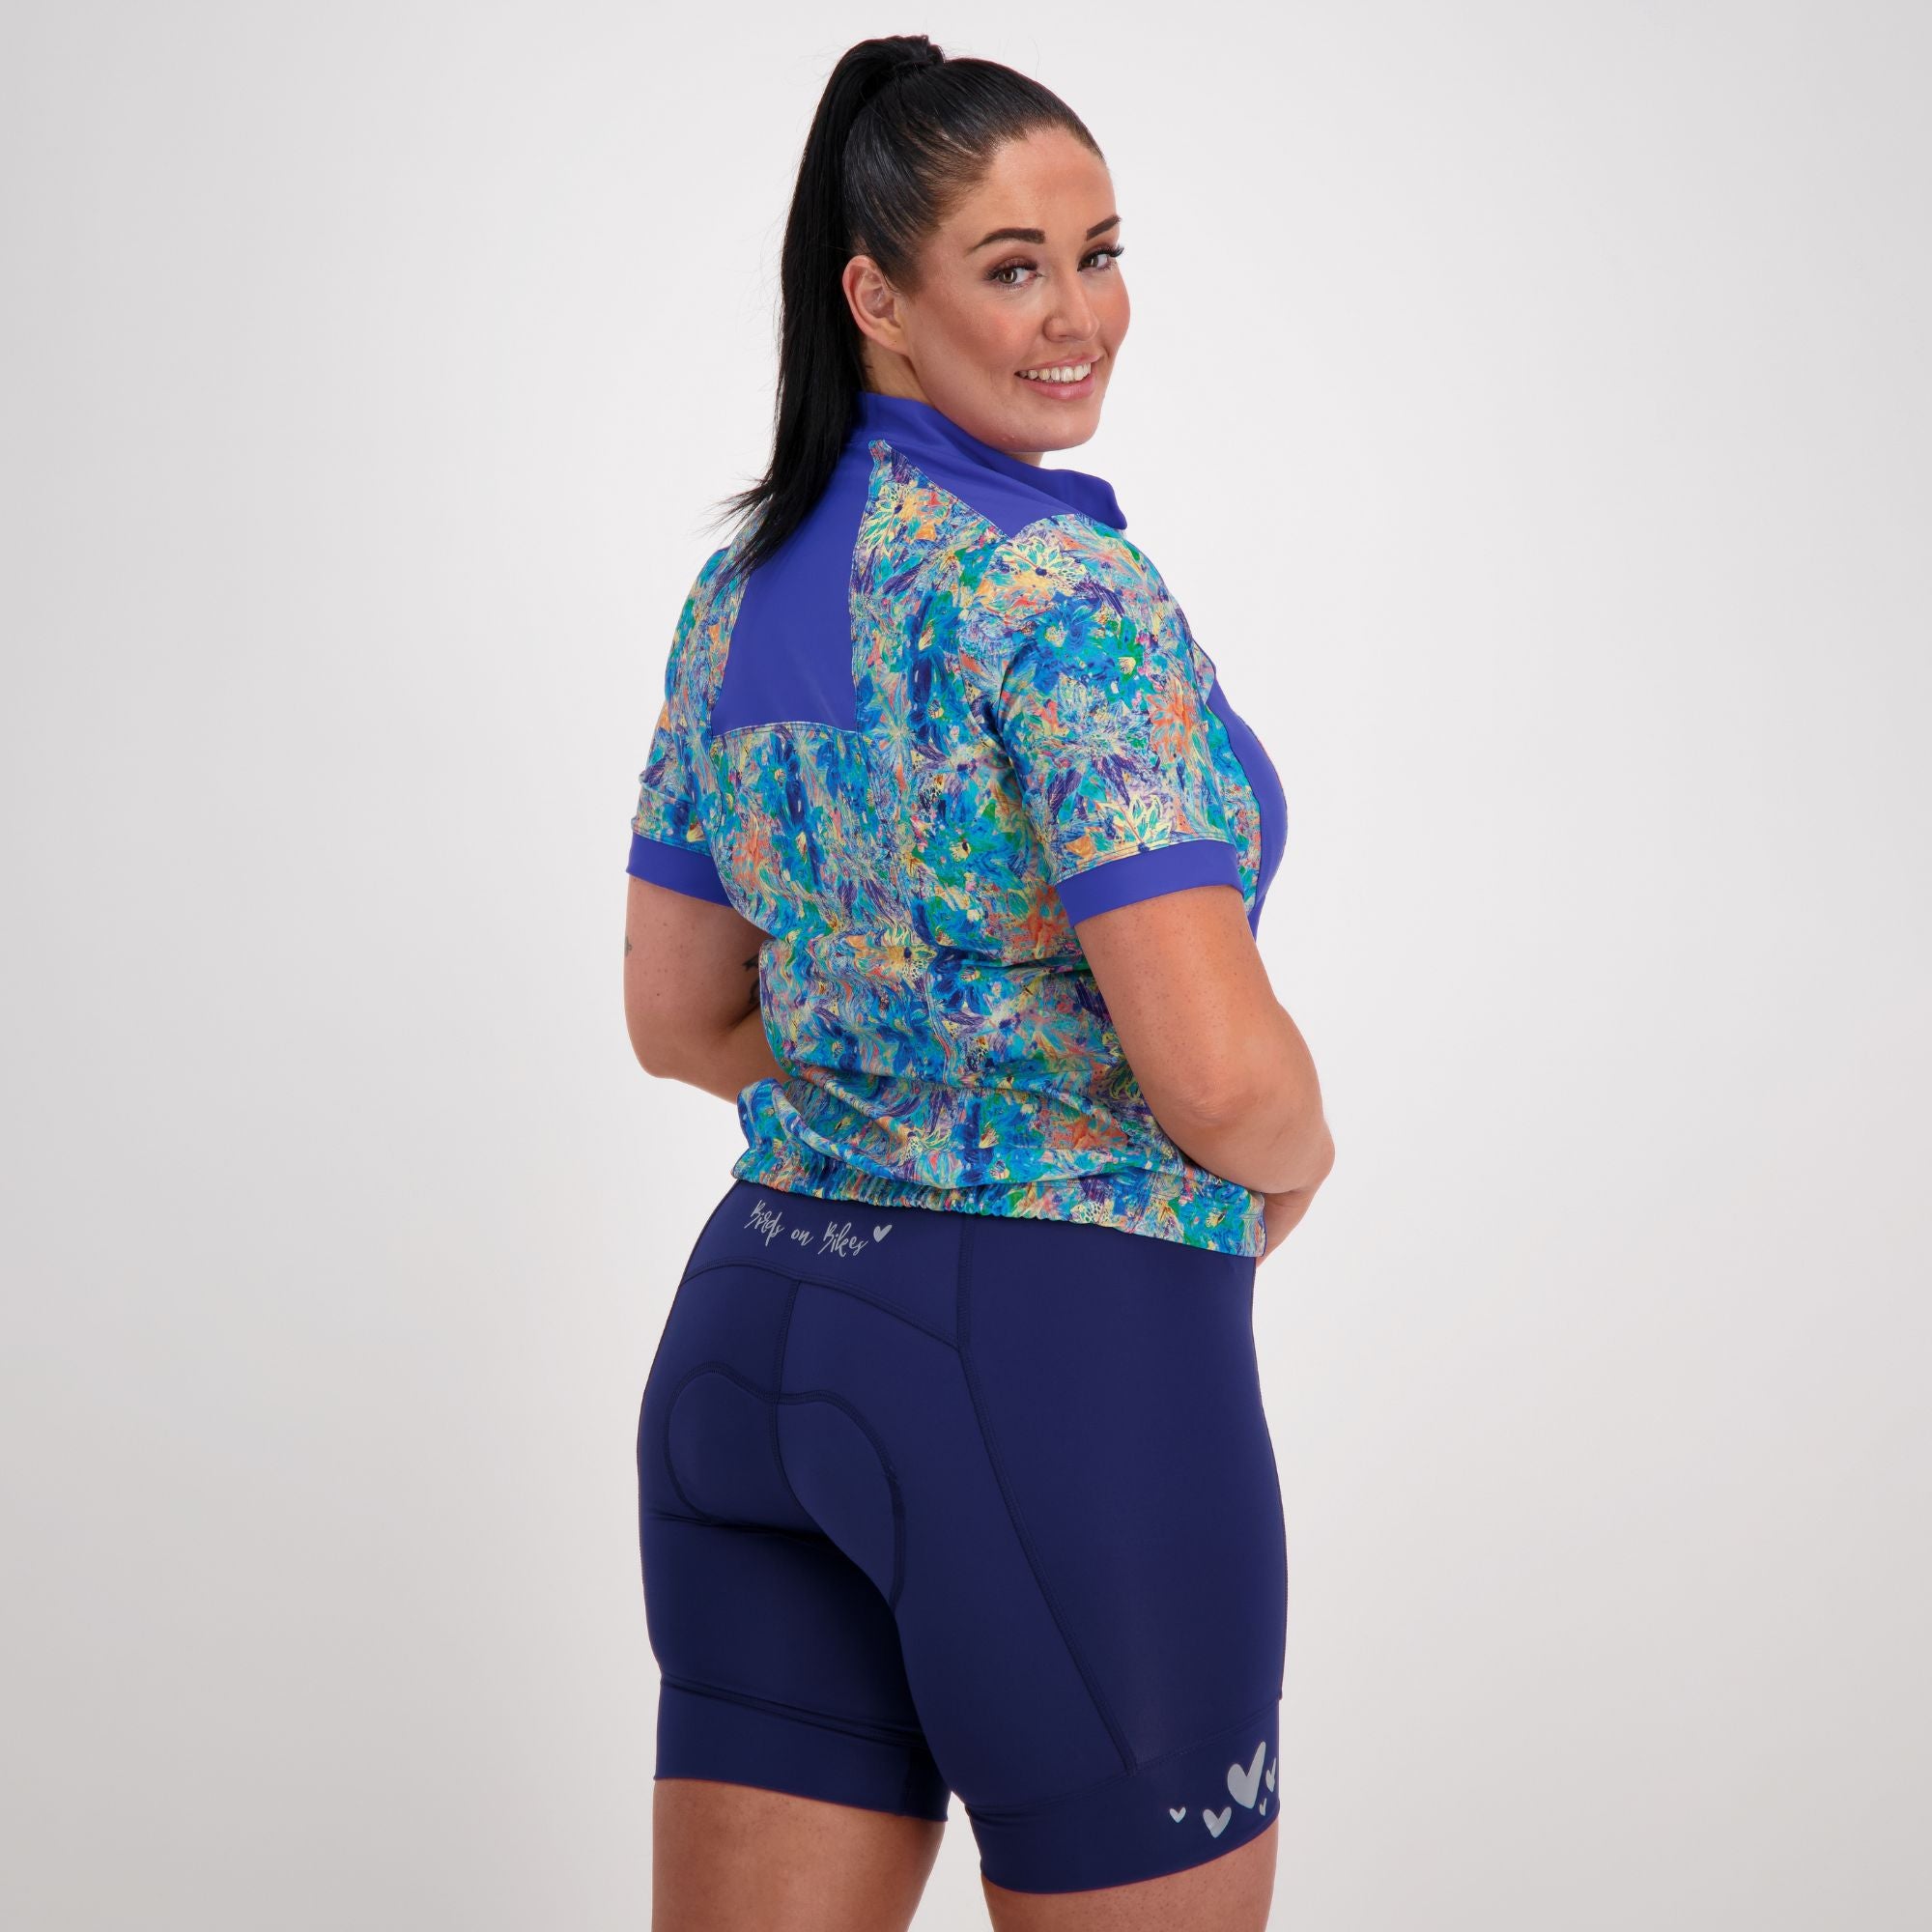 Back view of model wearing the blue artsy floral carefree cycling jersey